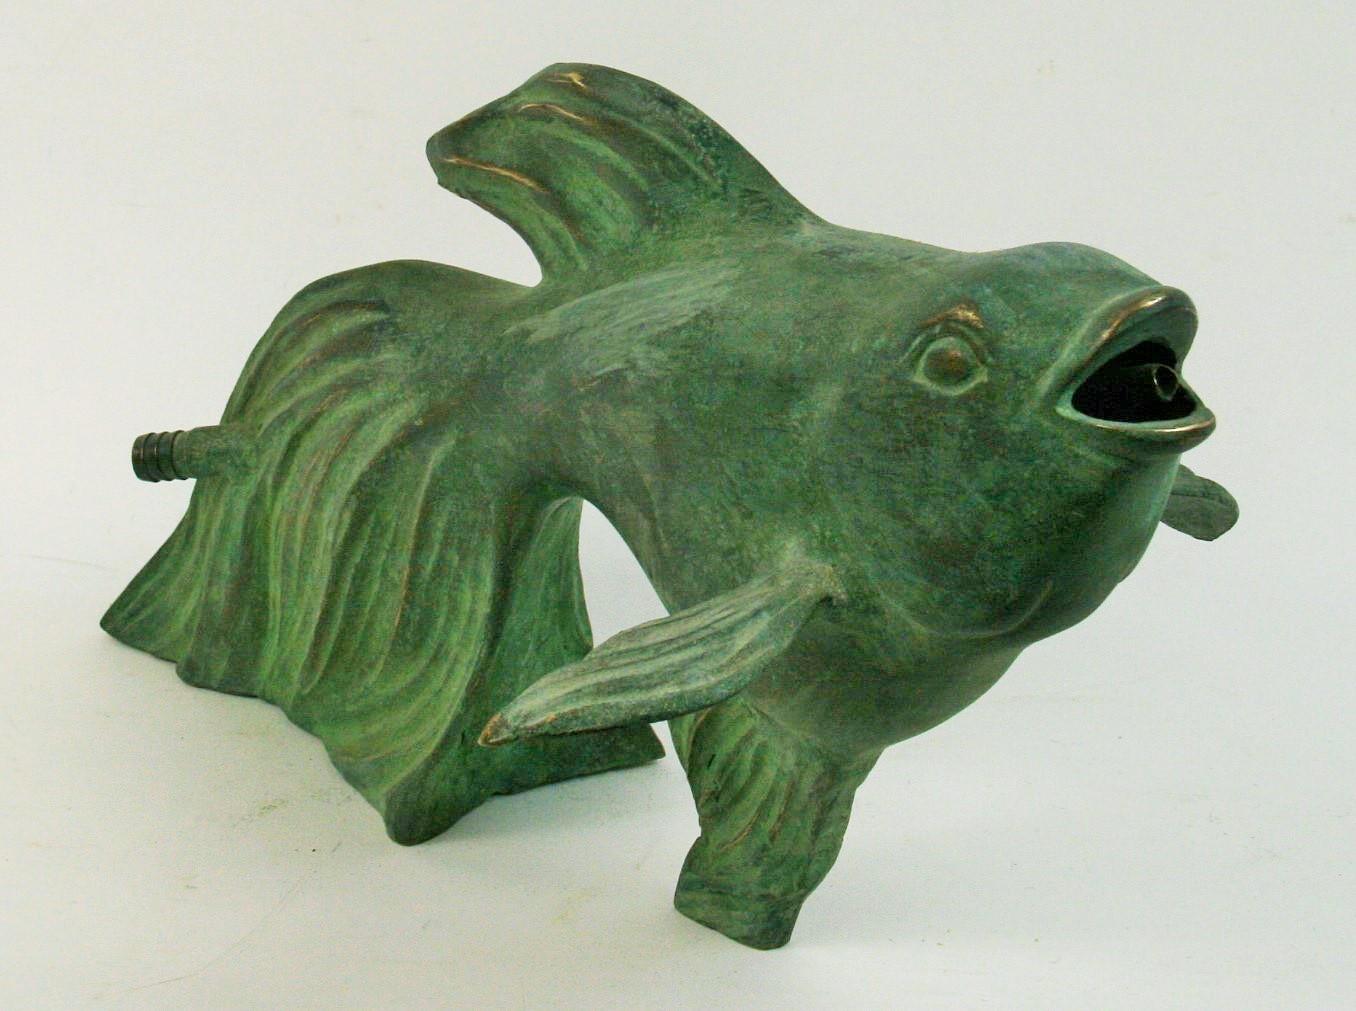 8-165 Japanese bronze Koi fish  fountain sprout.
Has a wonderful aged green patina
Can be used as a decorative sculpture.